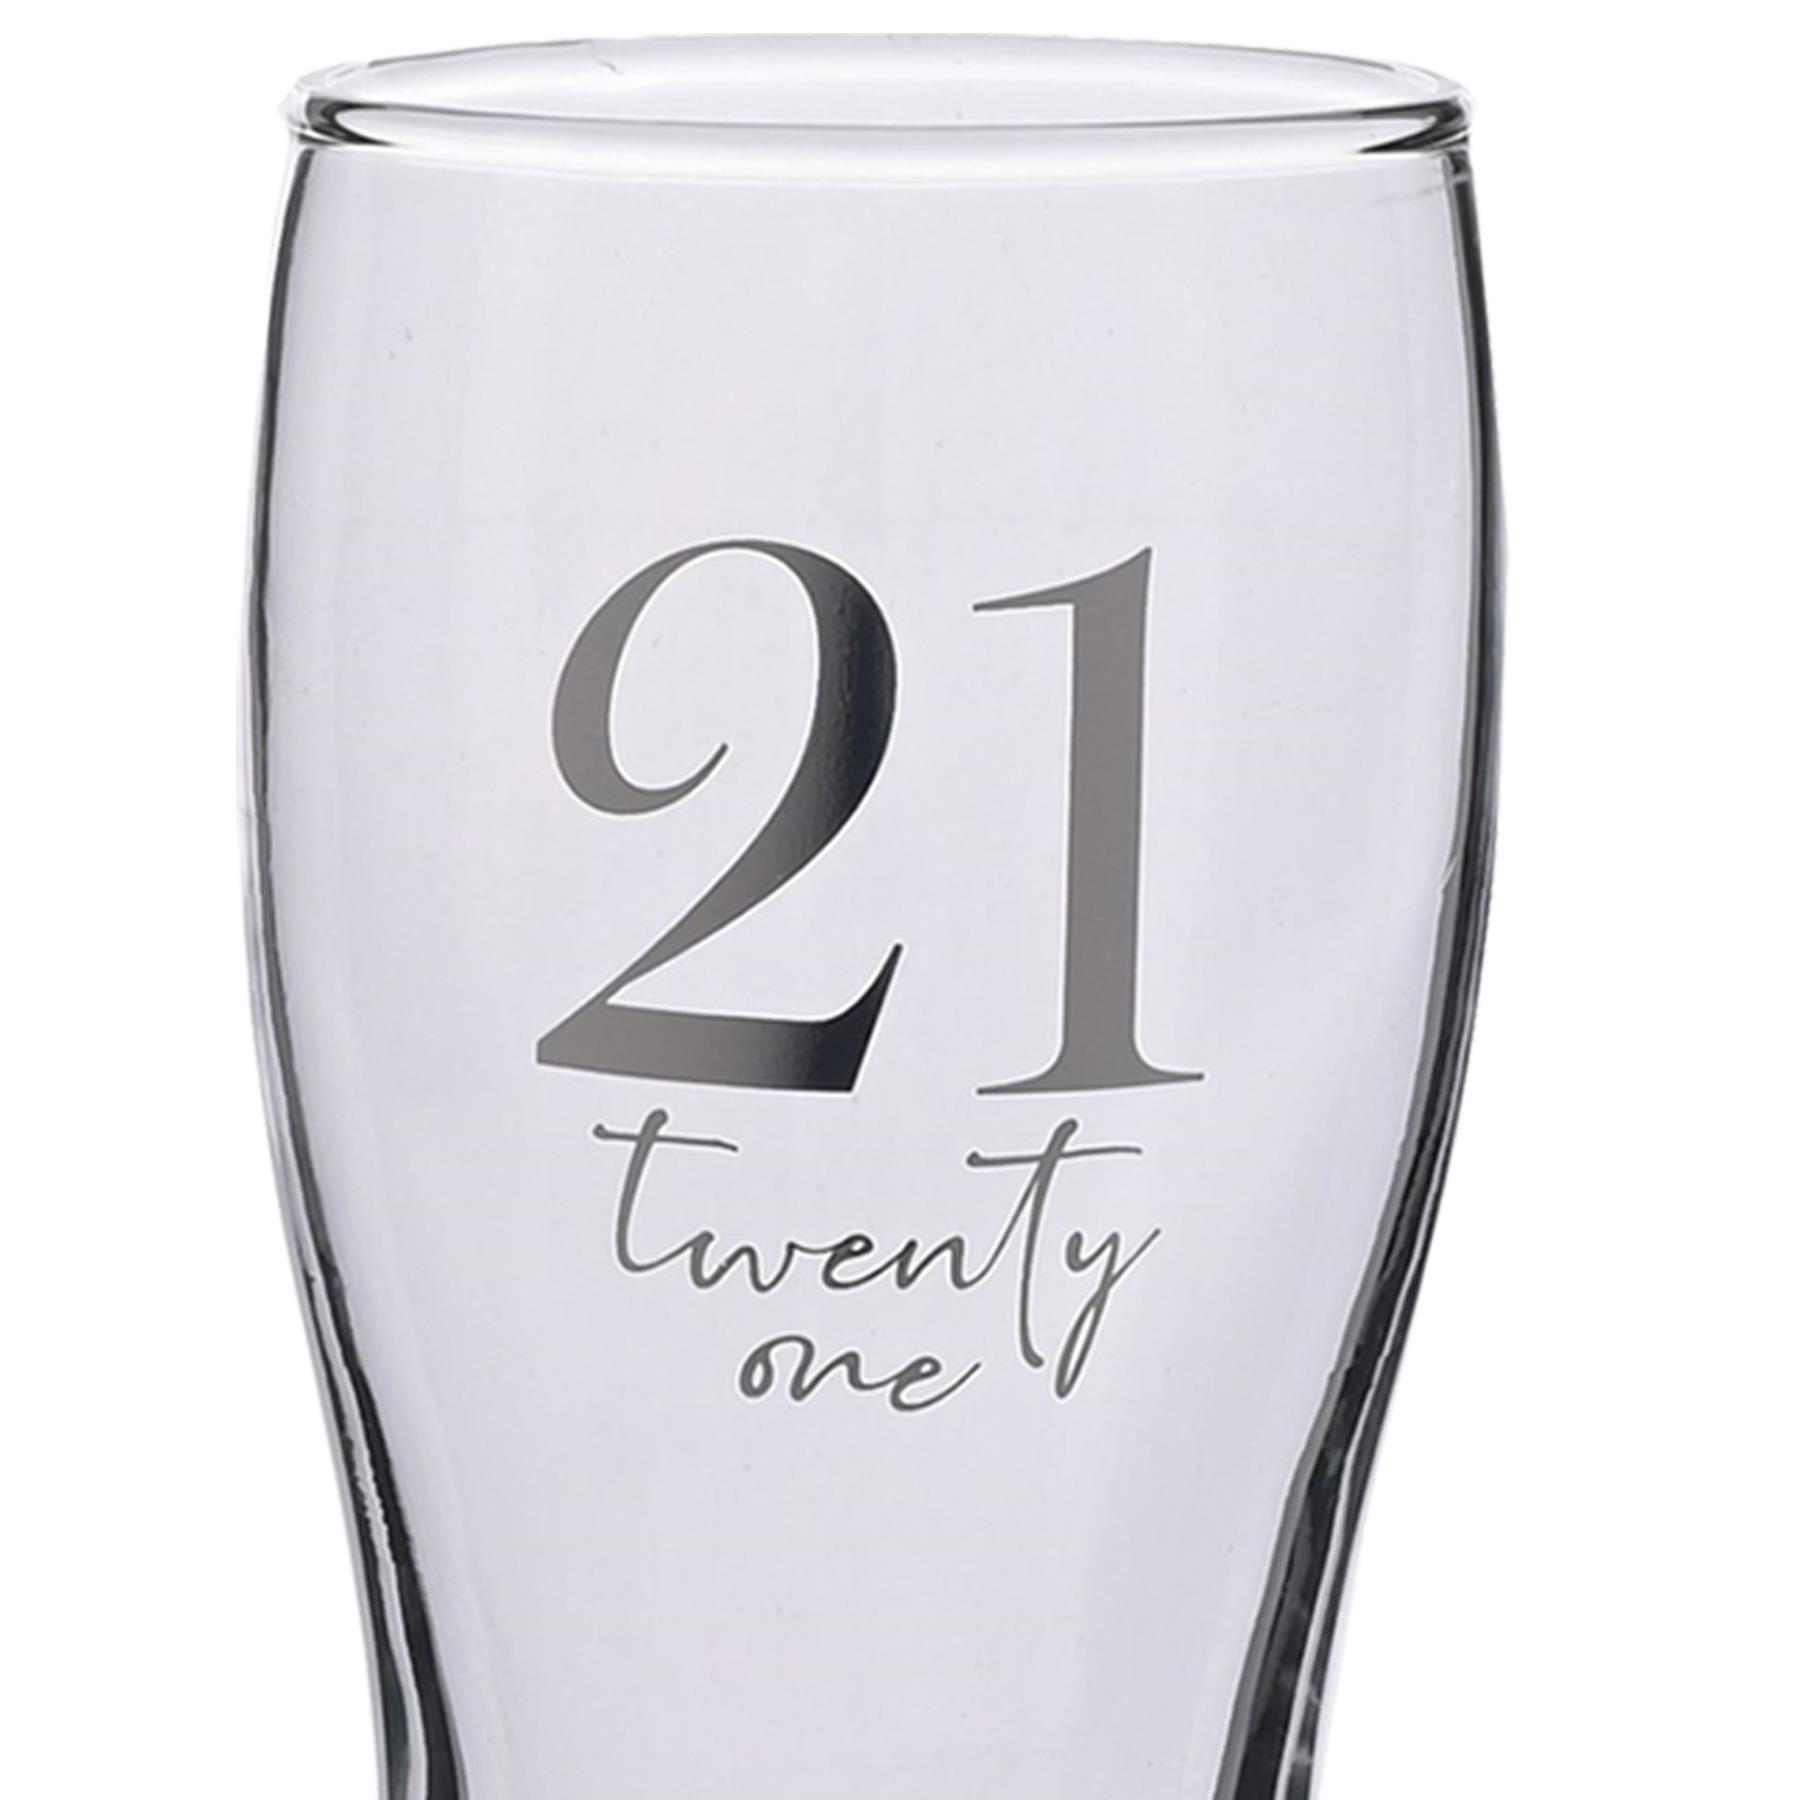 Birthday Pint Beer Glass with Silver Detail - 21